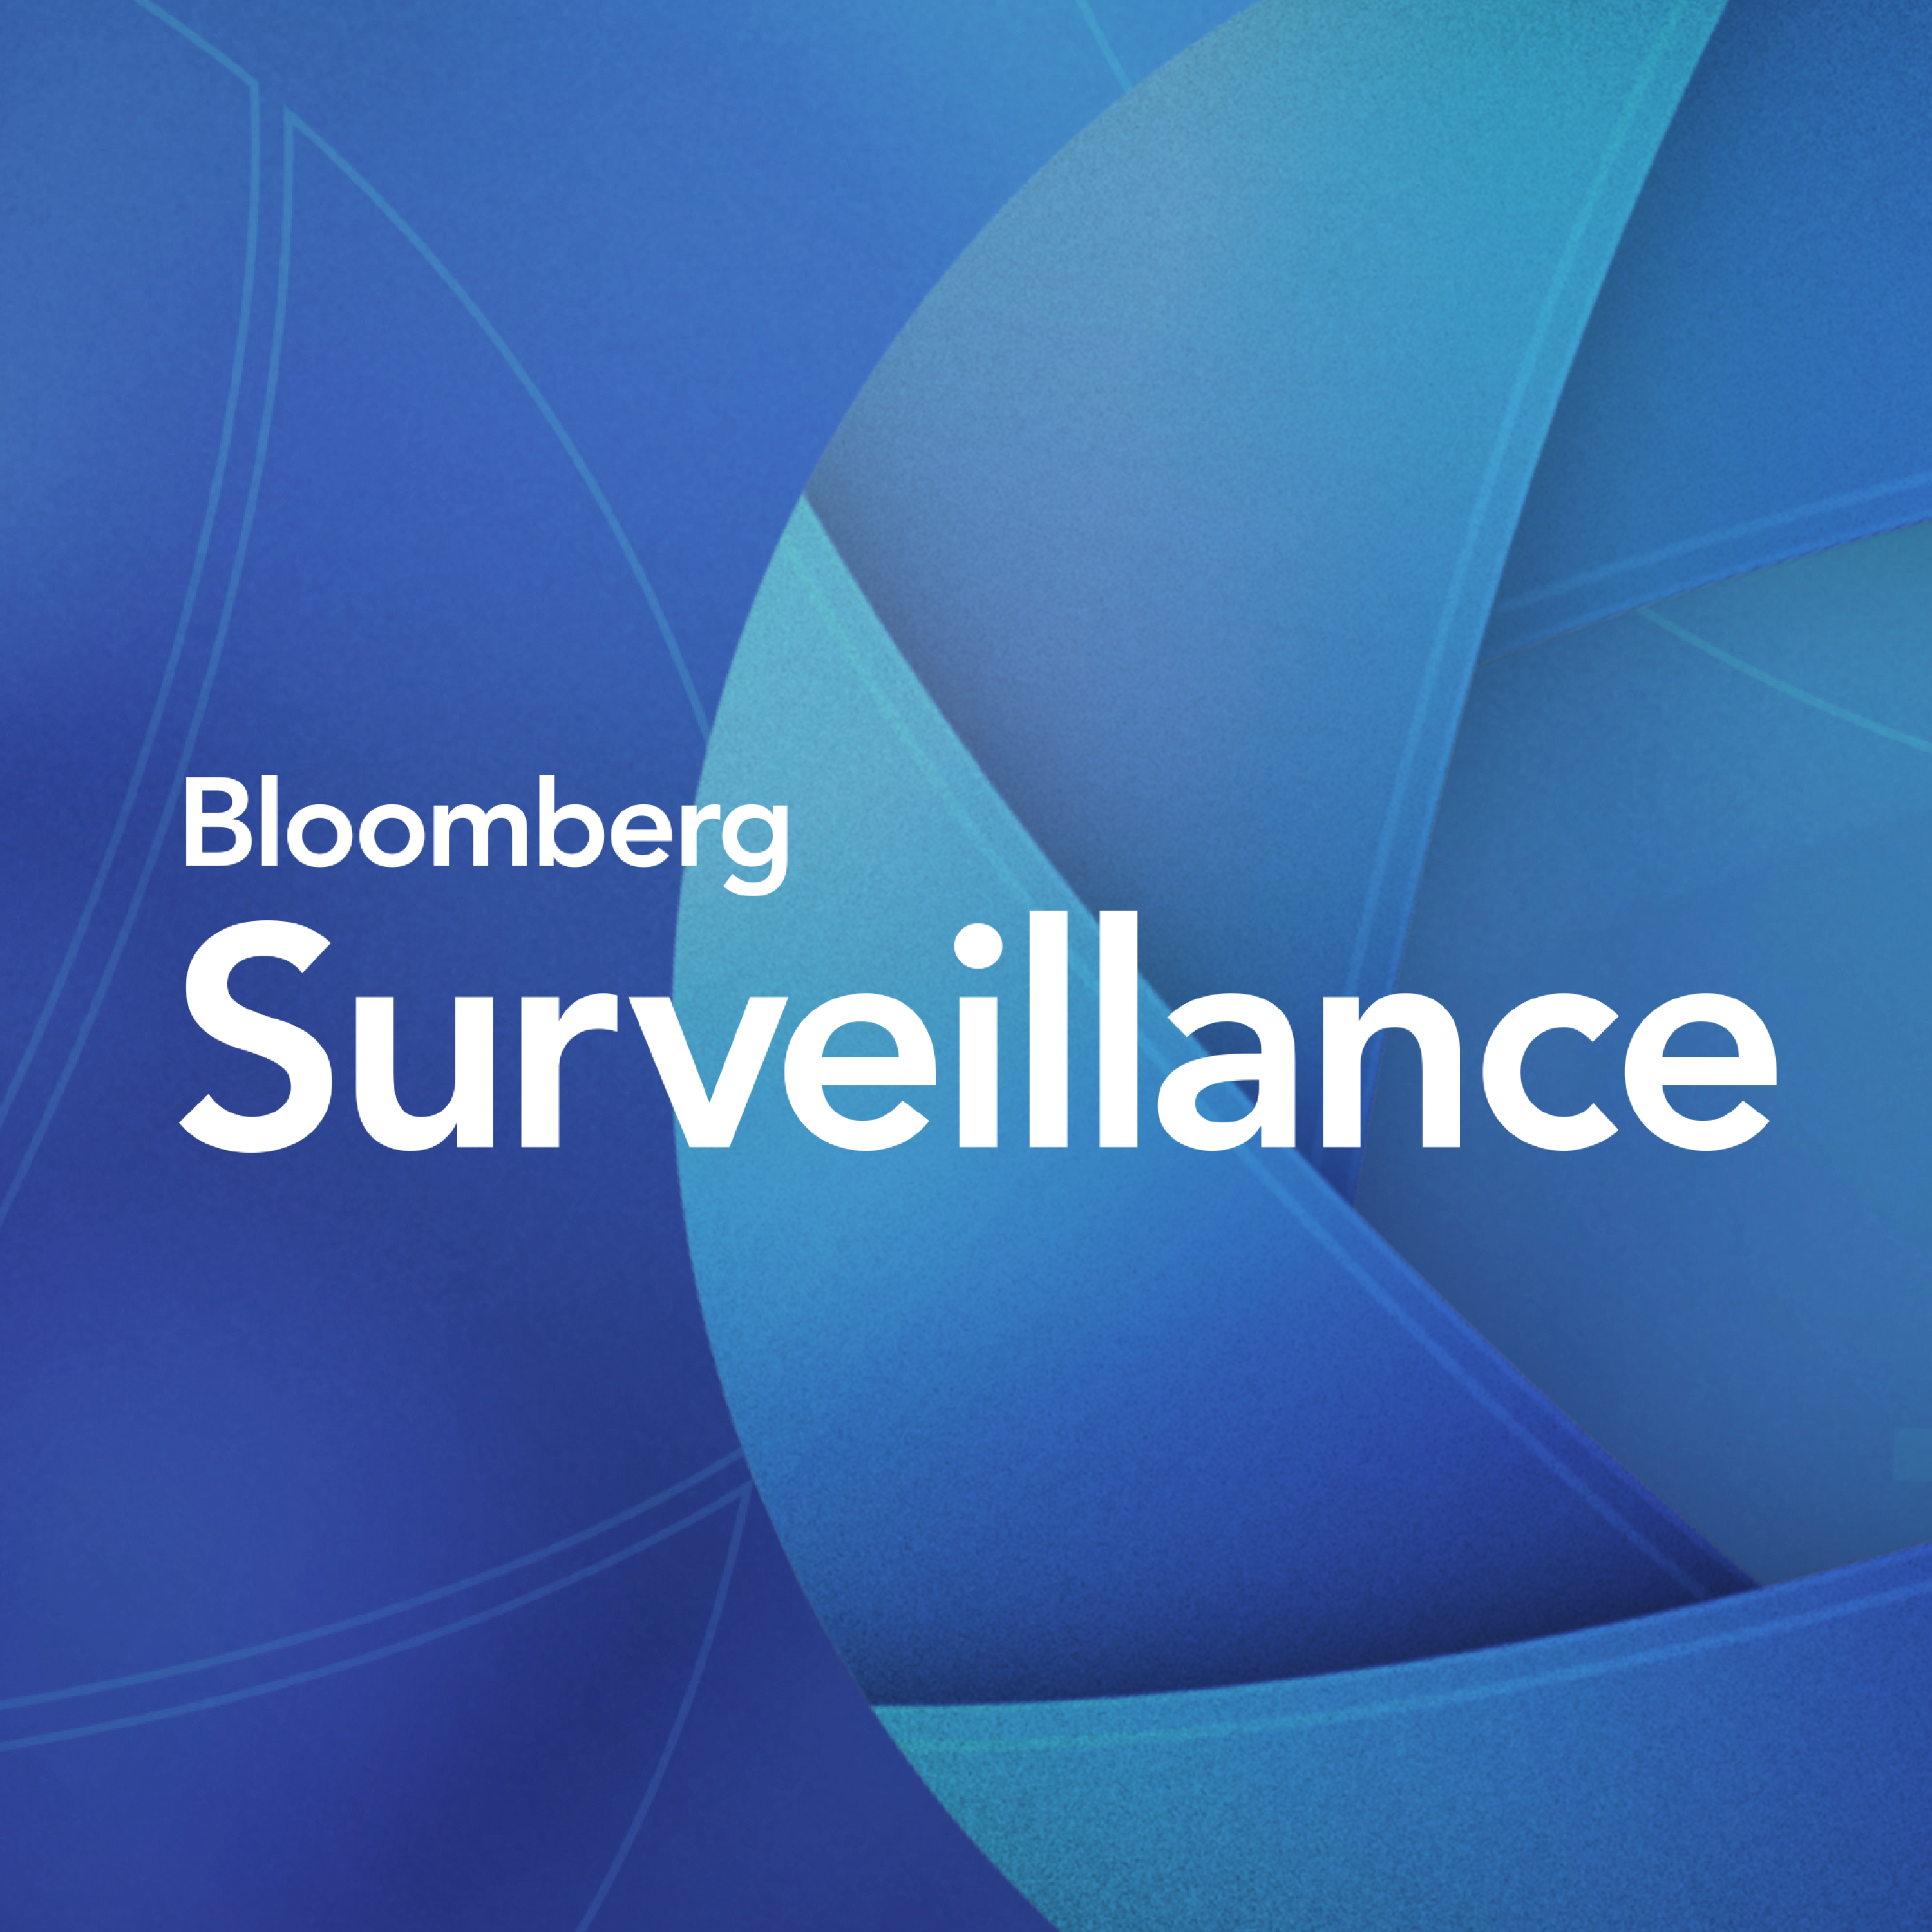 Surveillance: Inflation with Sen. Rounds (Podcast)